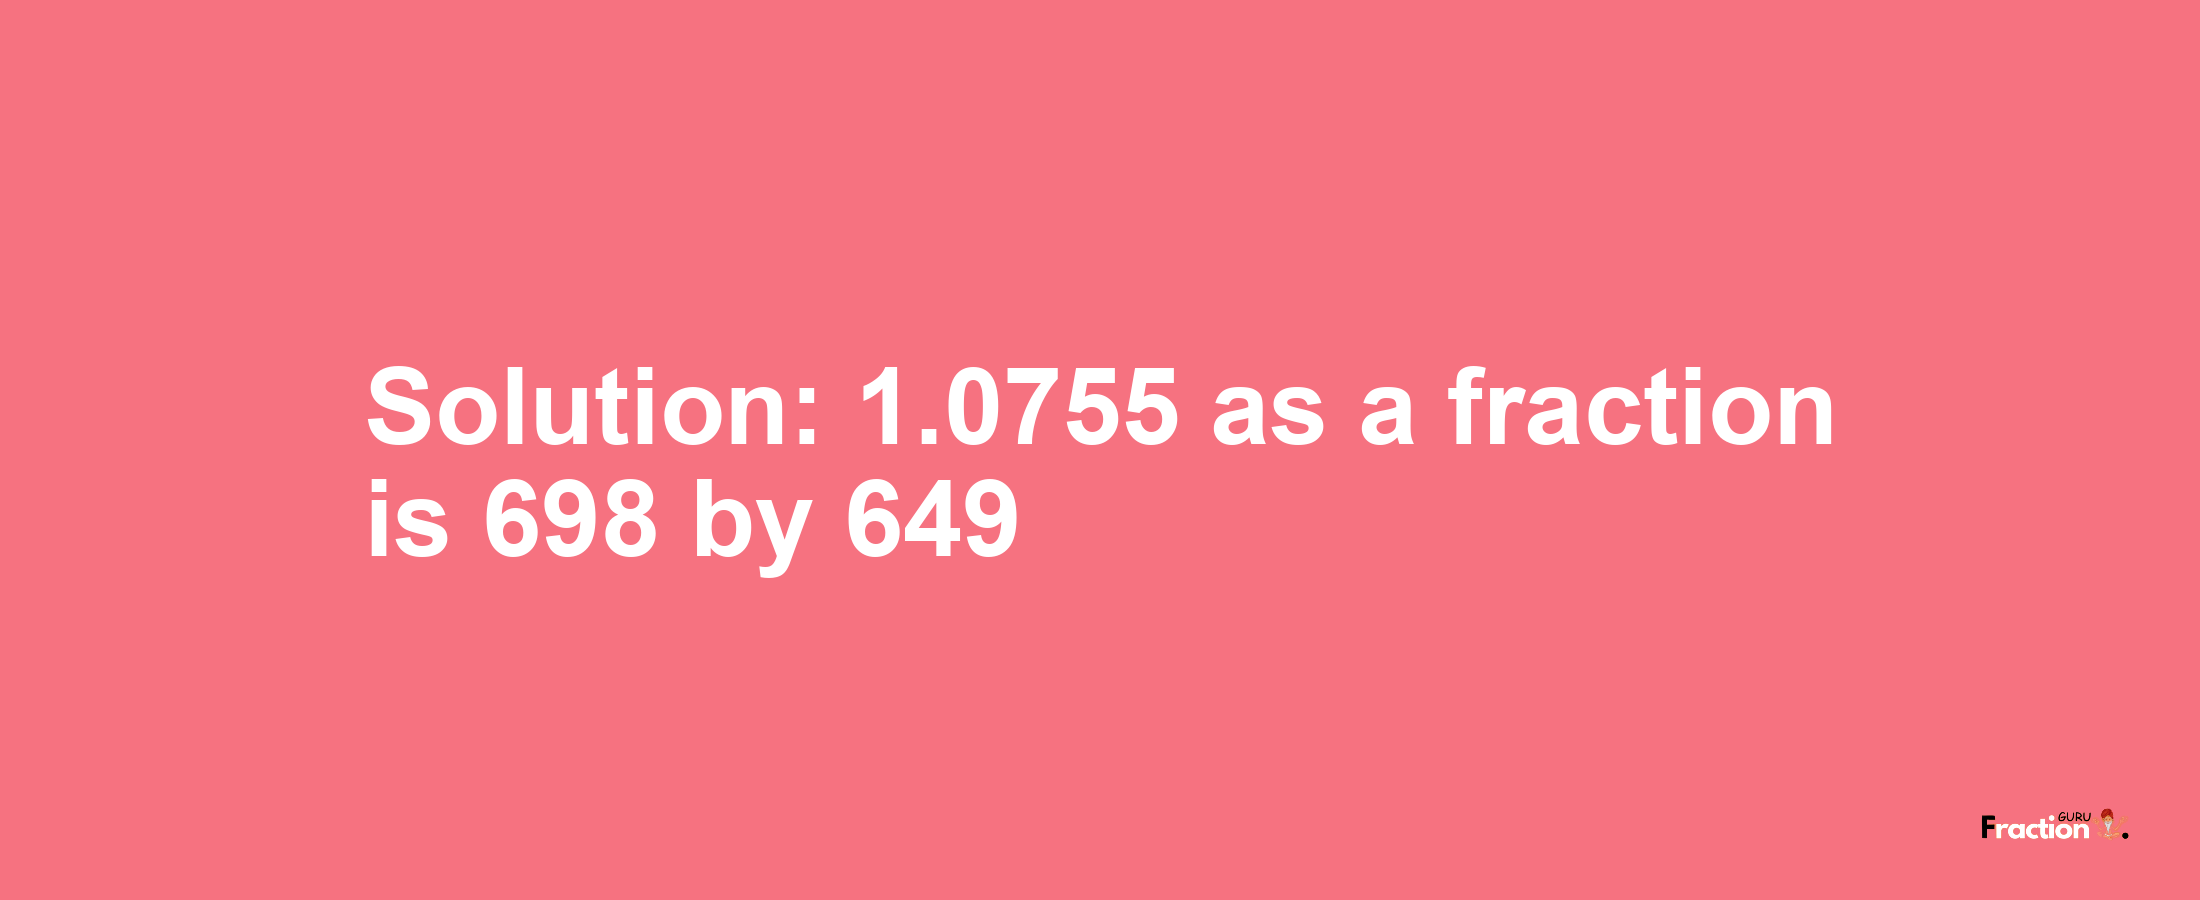 Solution:1.0755 as a fraction is 698/649